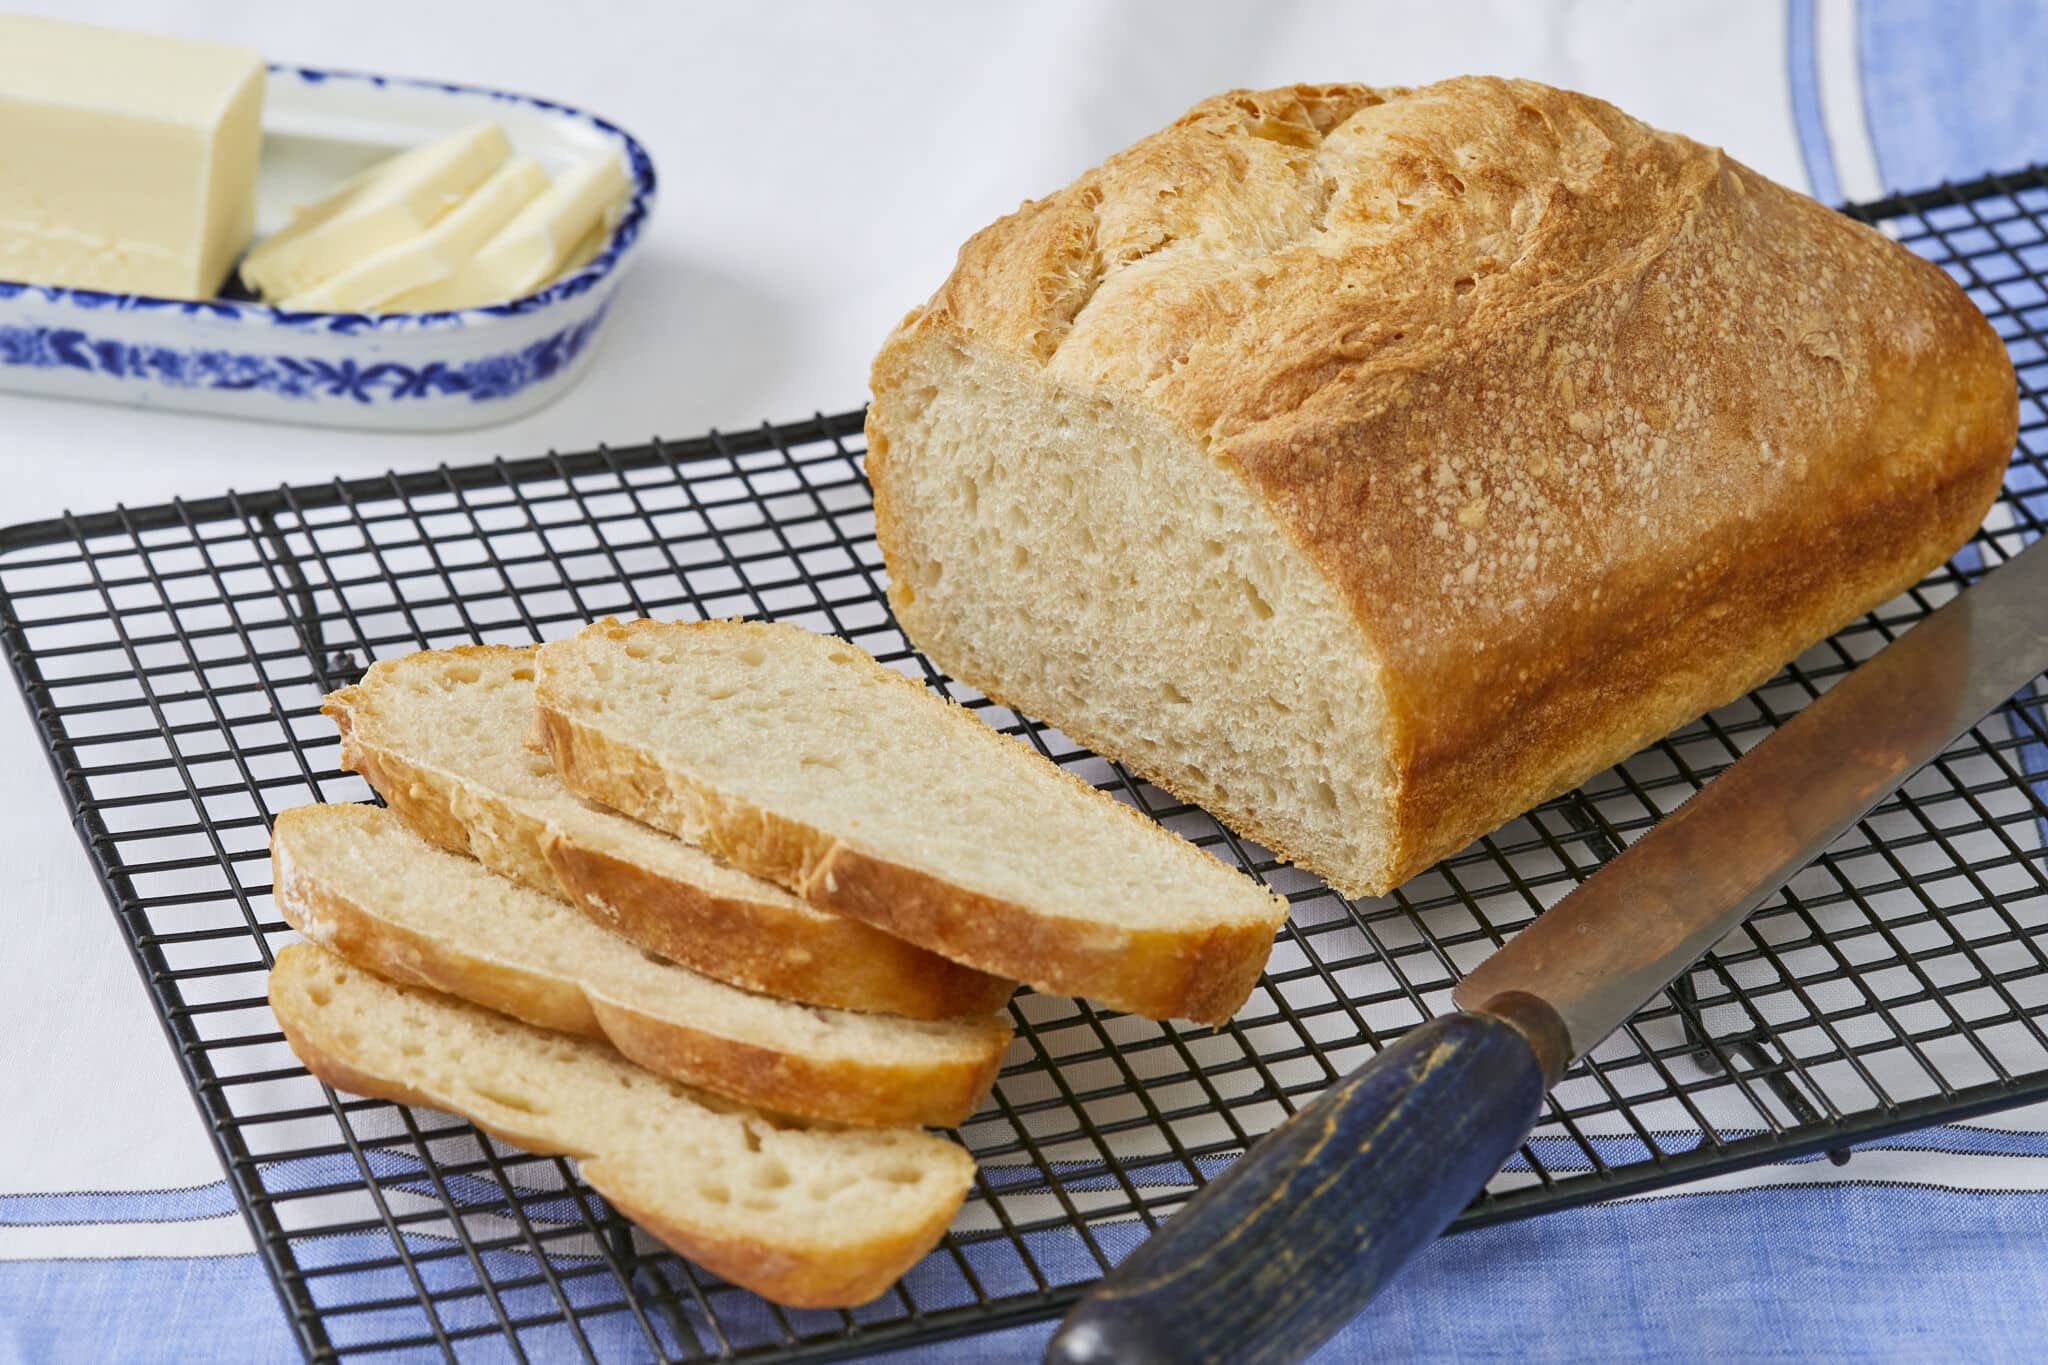 5-Ingredient No-Knead Sandwich Bread is sliced and cooling on a black wire rack with a bread knife next to it. The bread has a golden crisp crust and a soft, tender even crumb. Butter is served on the side to pair with the bread.